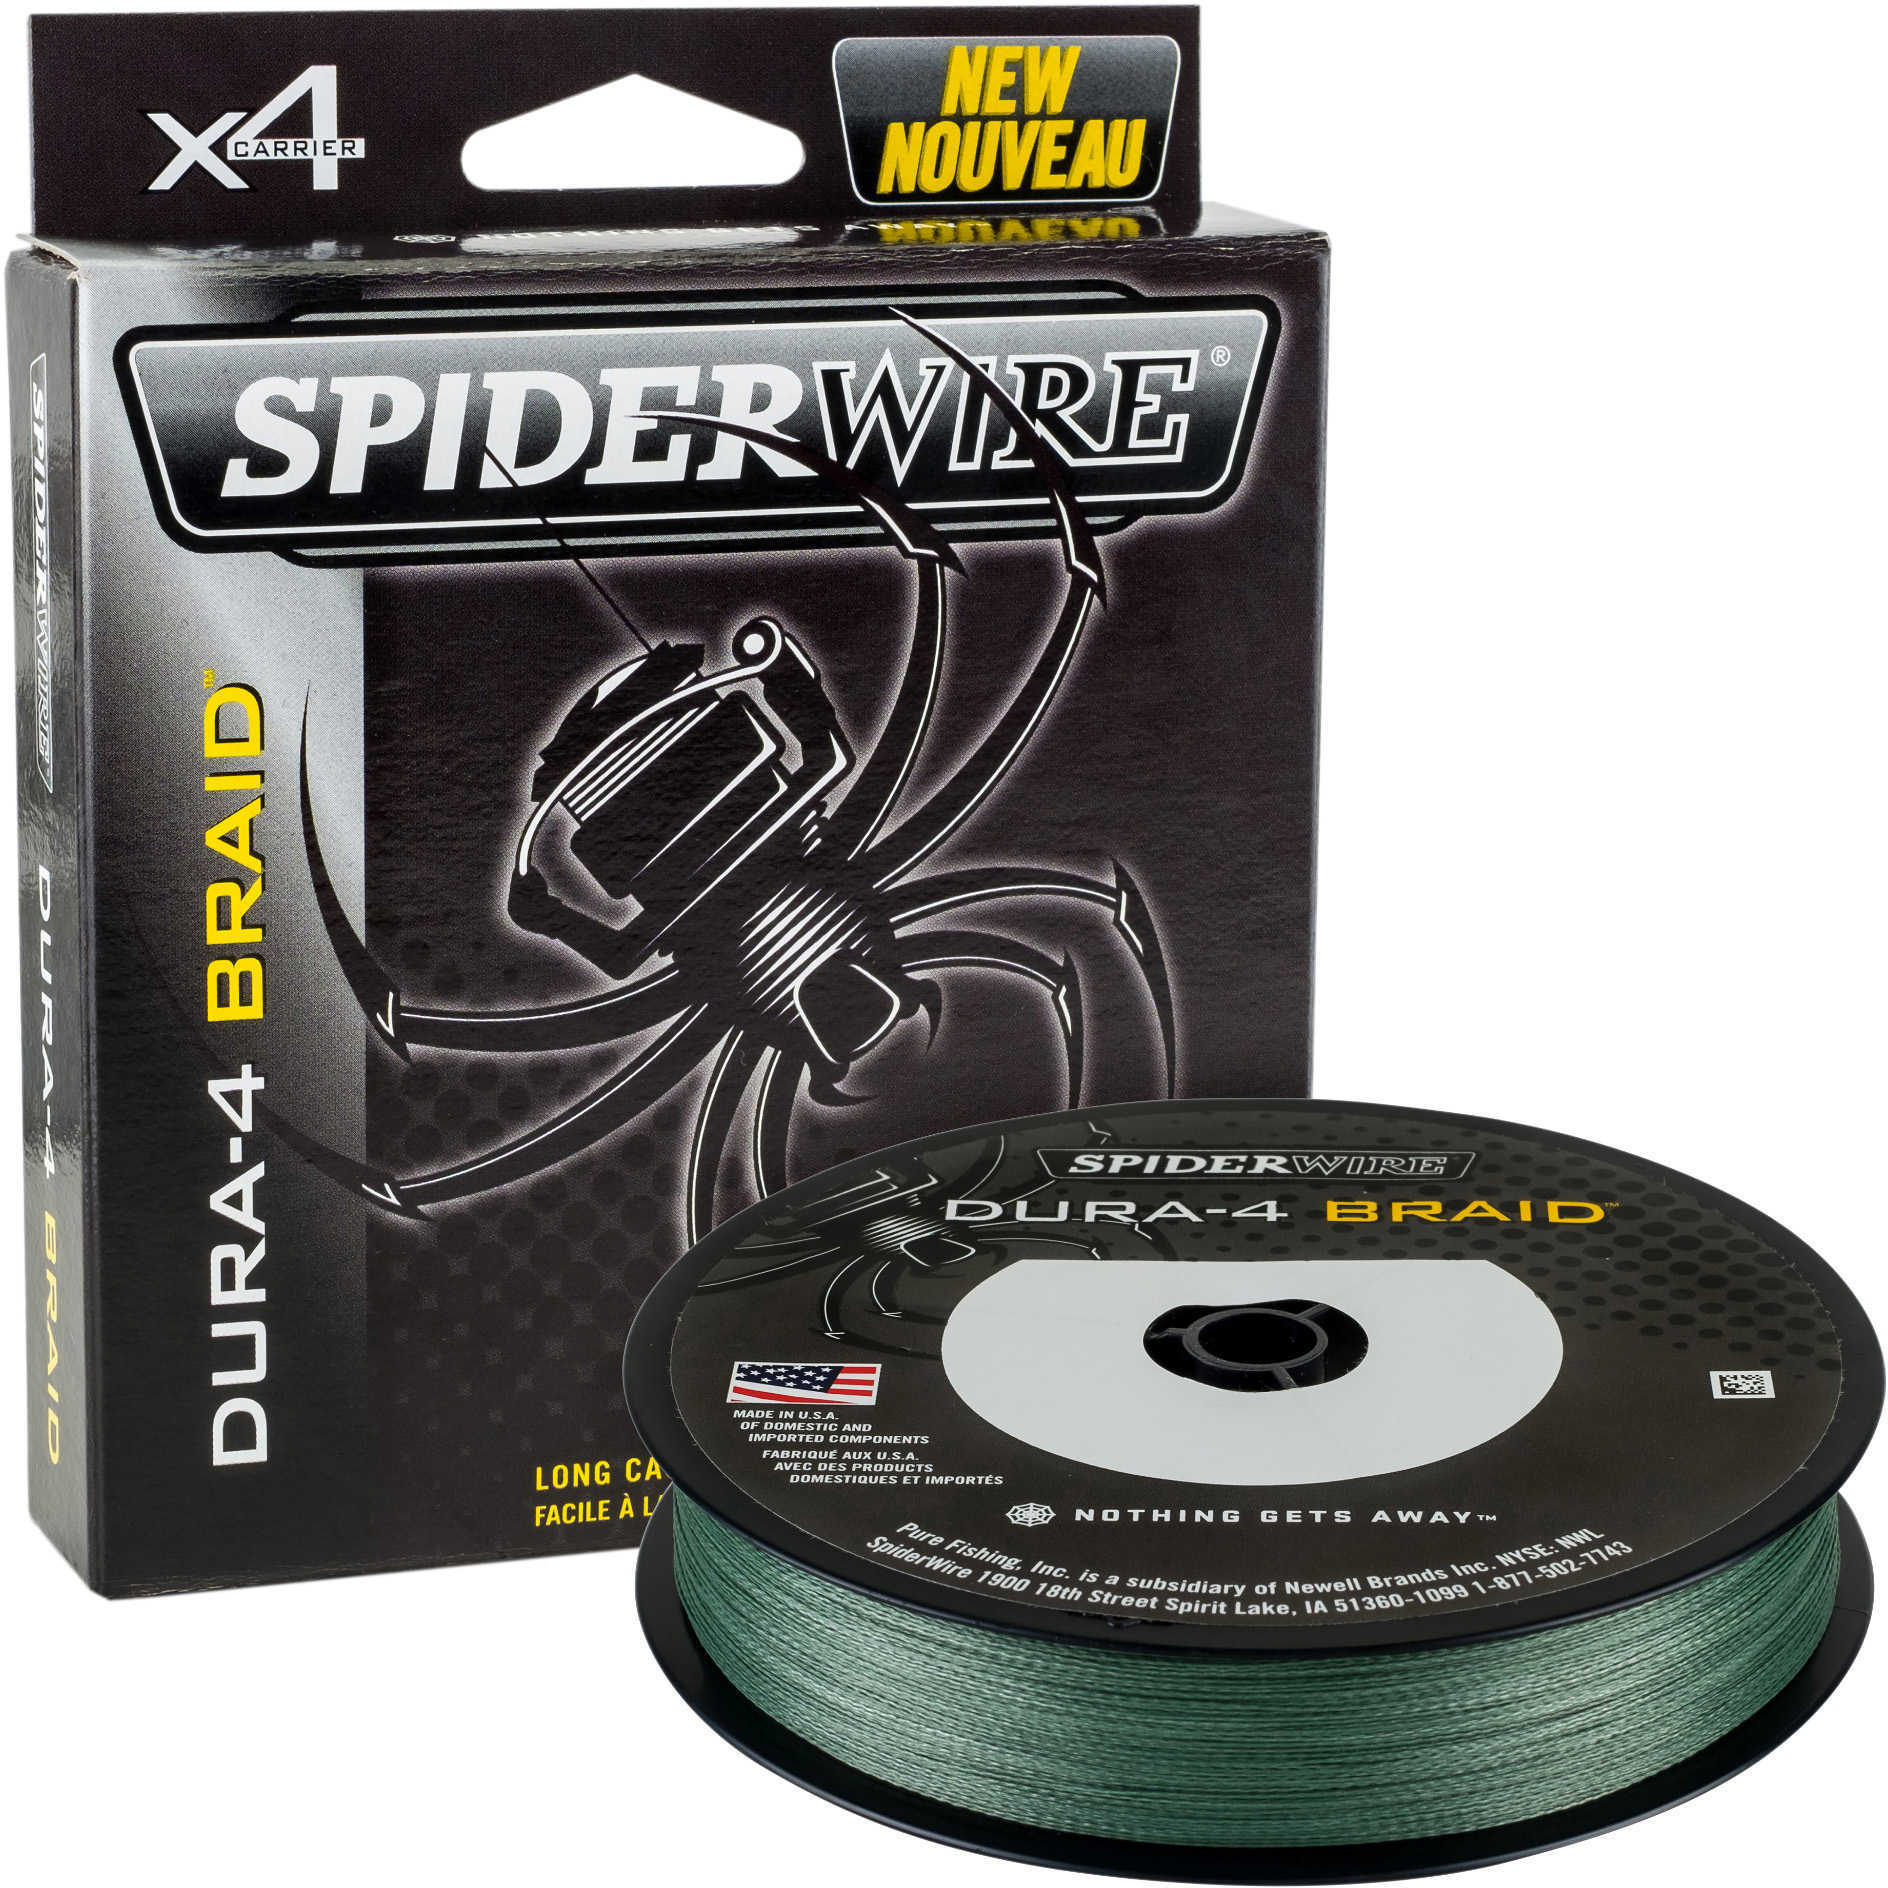 Spiderwire Dura-4 Braided Line 300 Yards , 65 lbs Tested, 0.015" Diameter, Moss Green